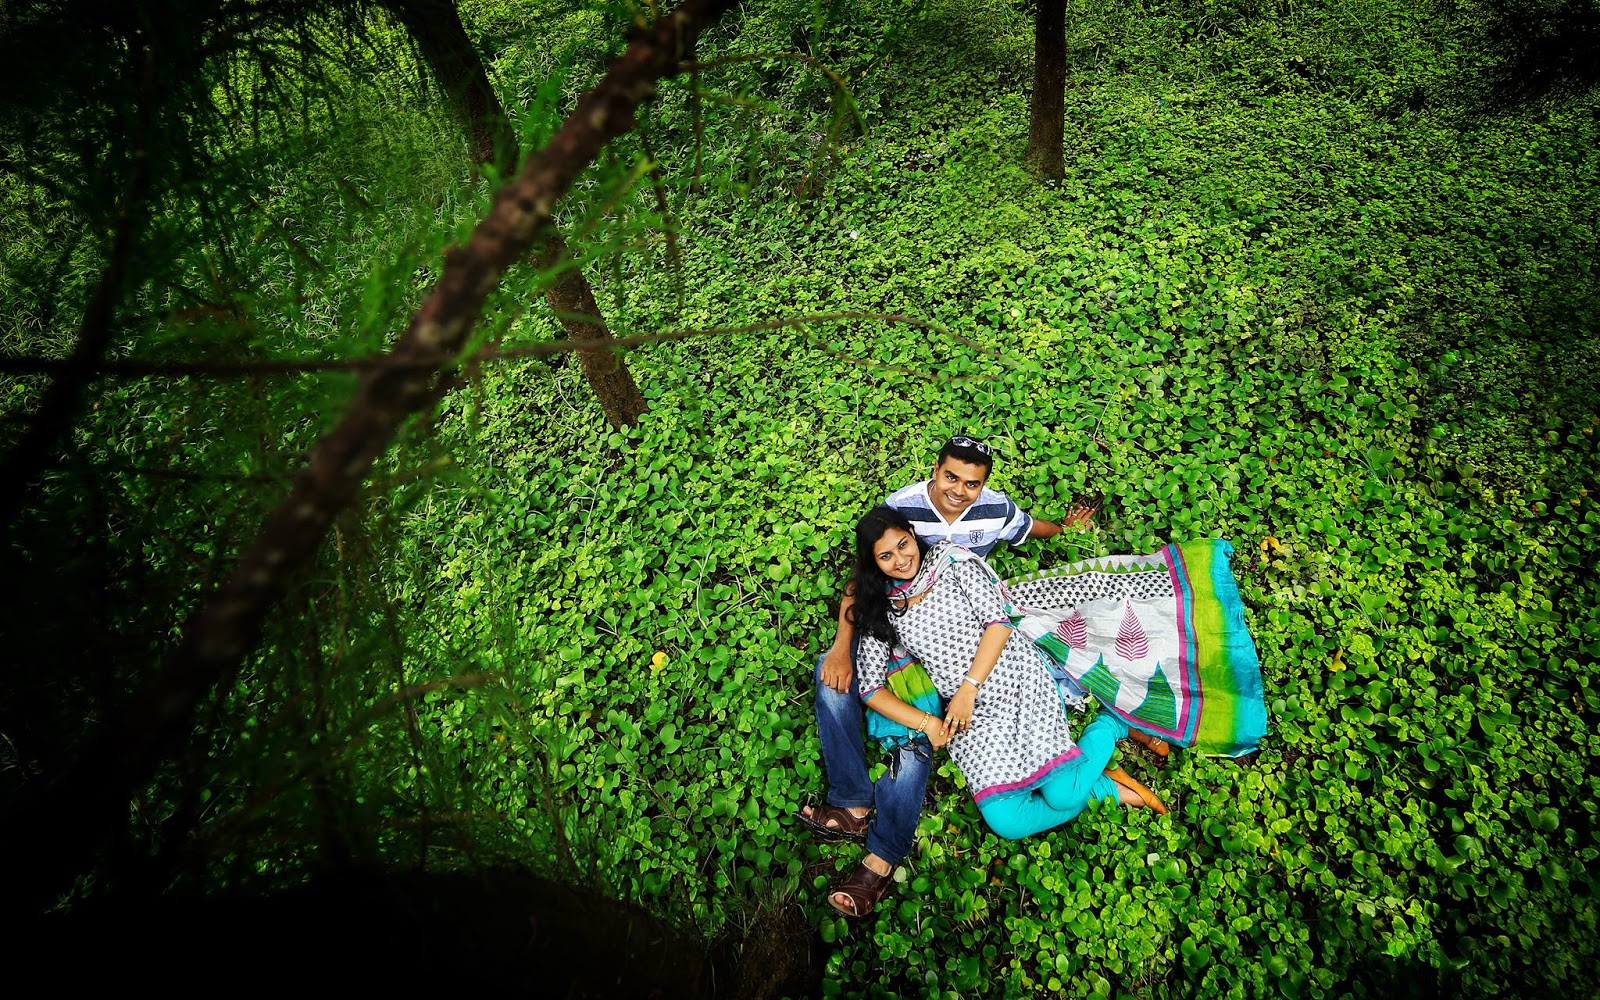  Couples pose in green forest